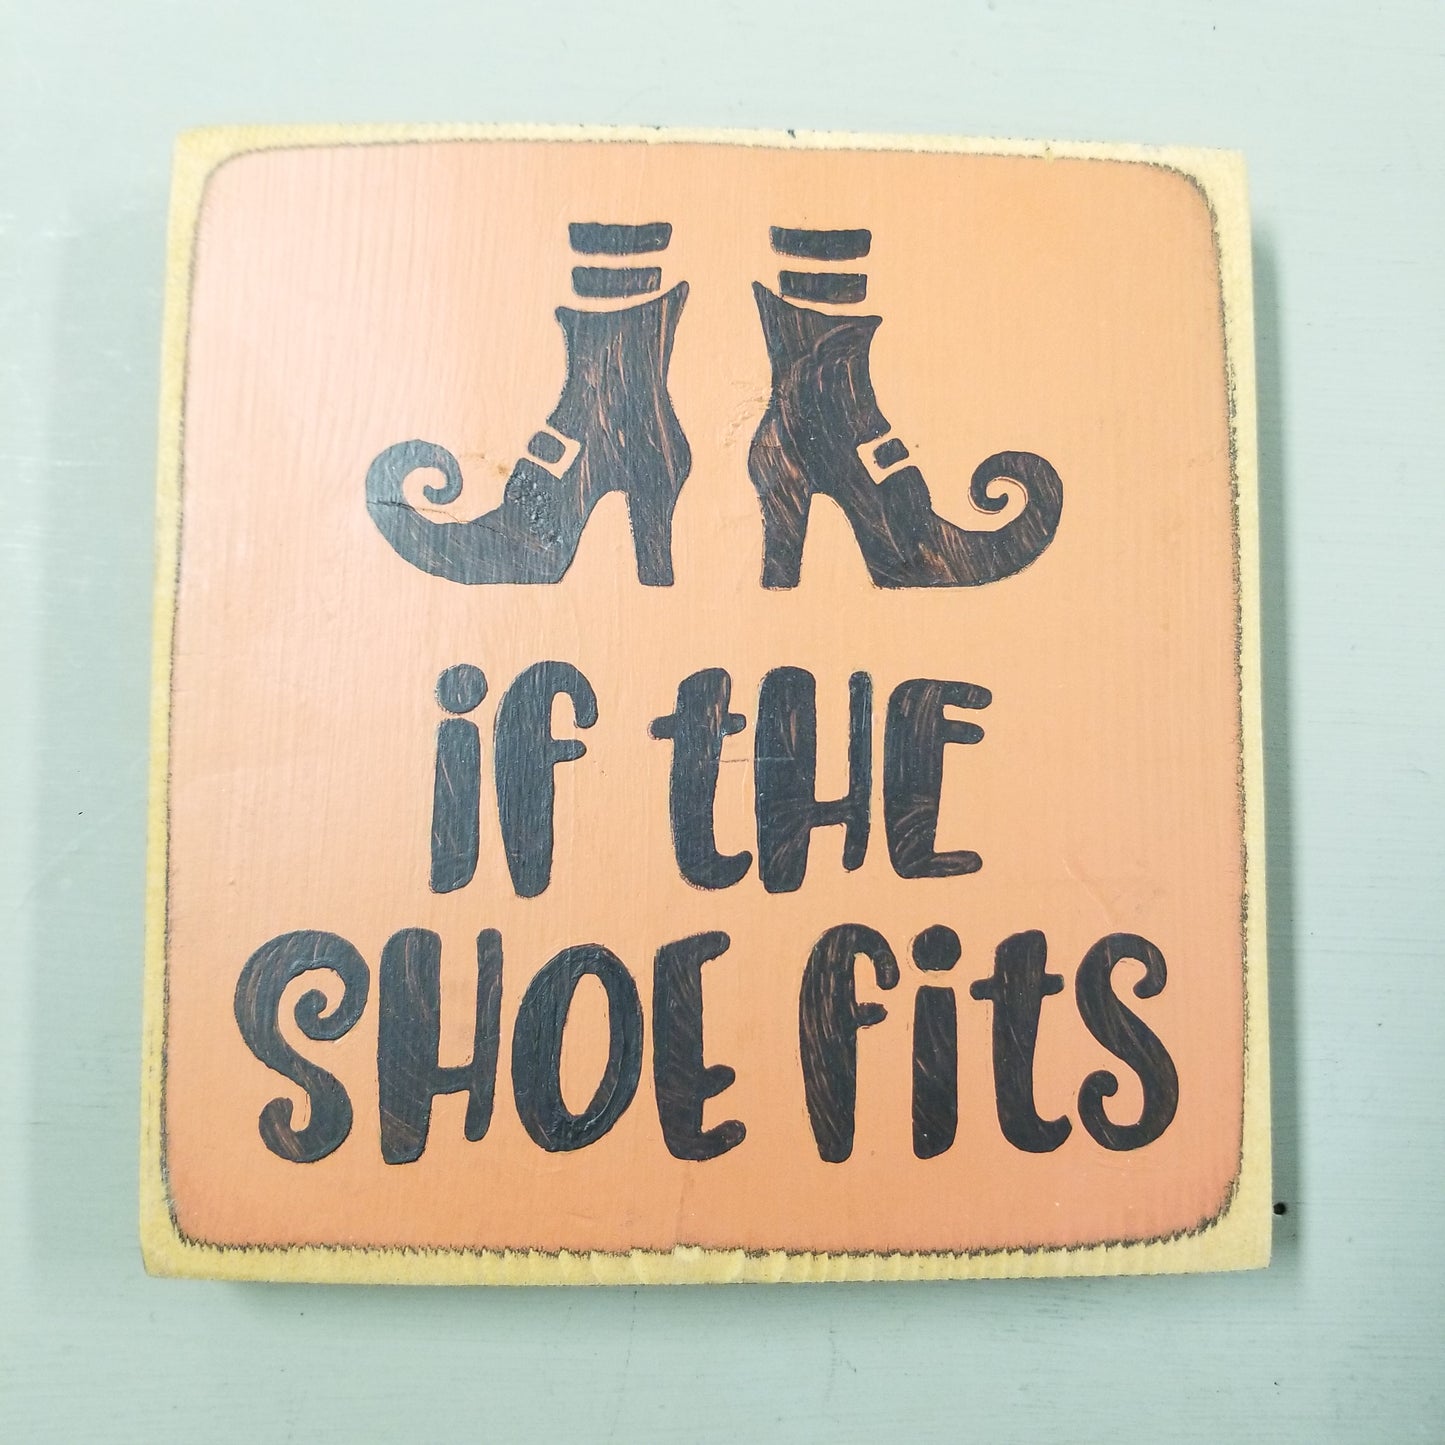 Halloween Sign - If The Shoe Fits